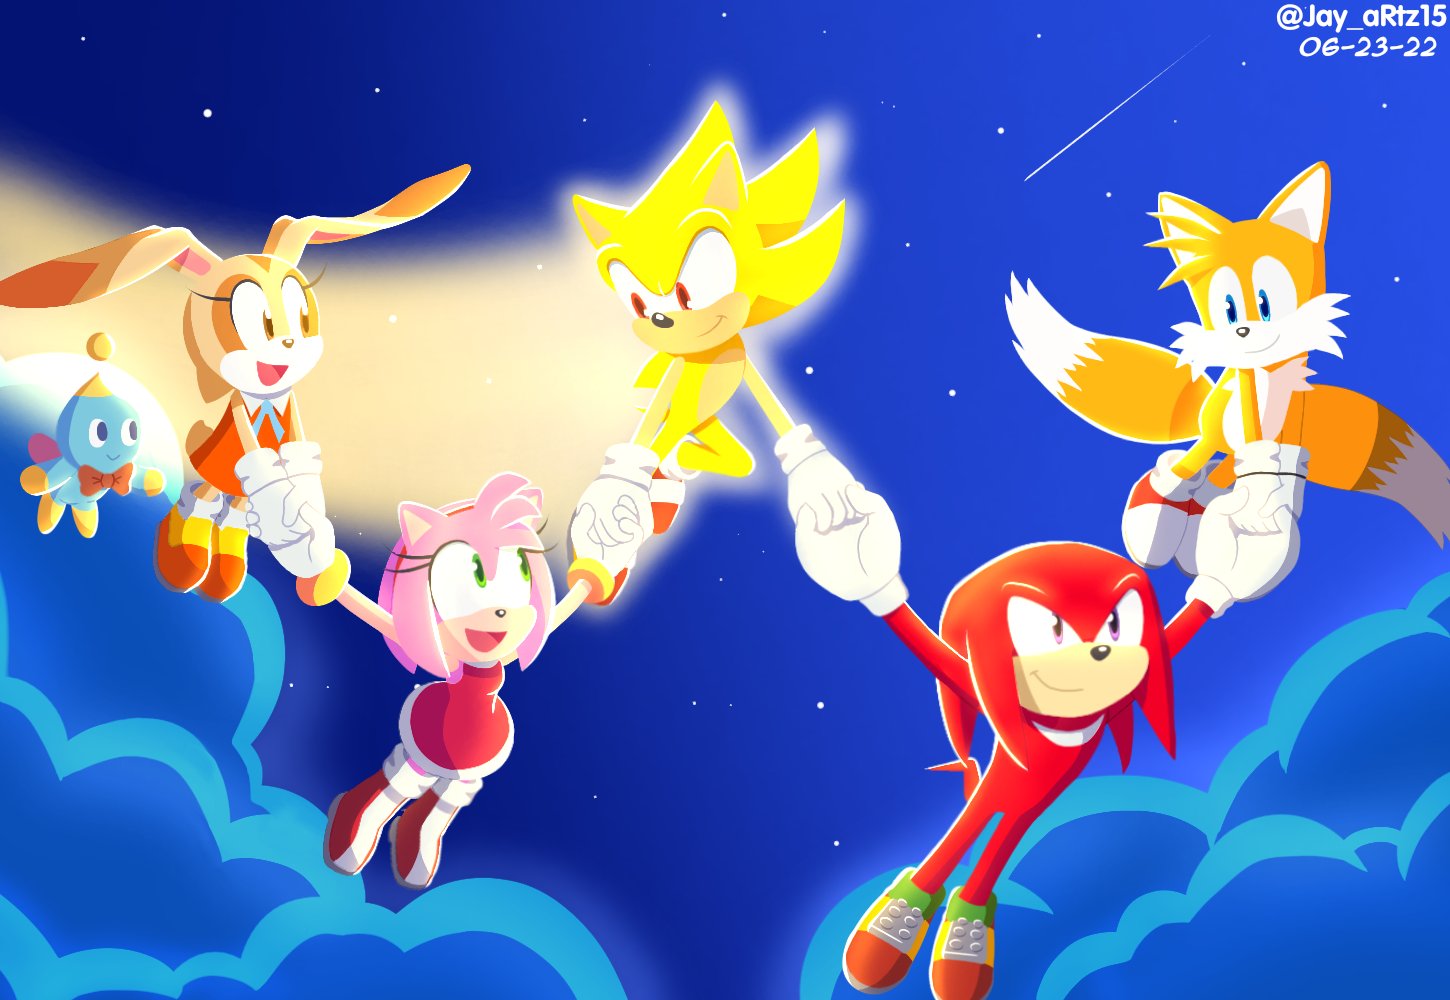 X 上的🌟🎄❄️Jay - aRtz❄️🎄🌟：「Sonic movie-versary was days ago. I made this  cool art based on the ending of Sonic Advance 3 but with the movie style  Advance Crew. #SonicMovie #SonicAdvance3 #SonicTheHedgehog